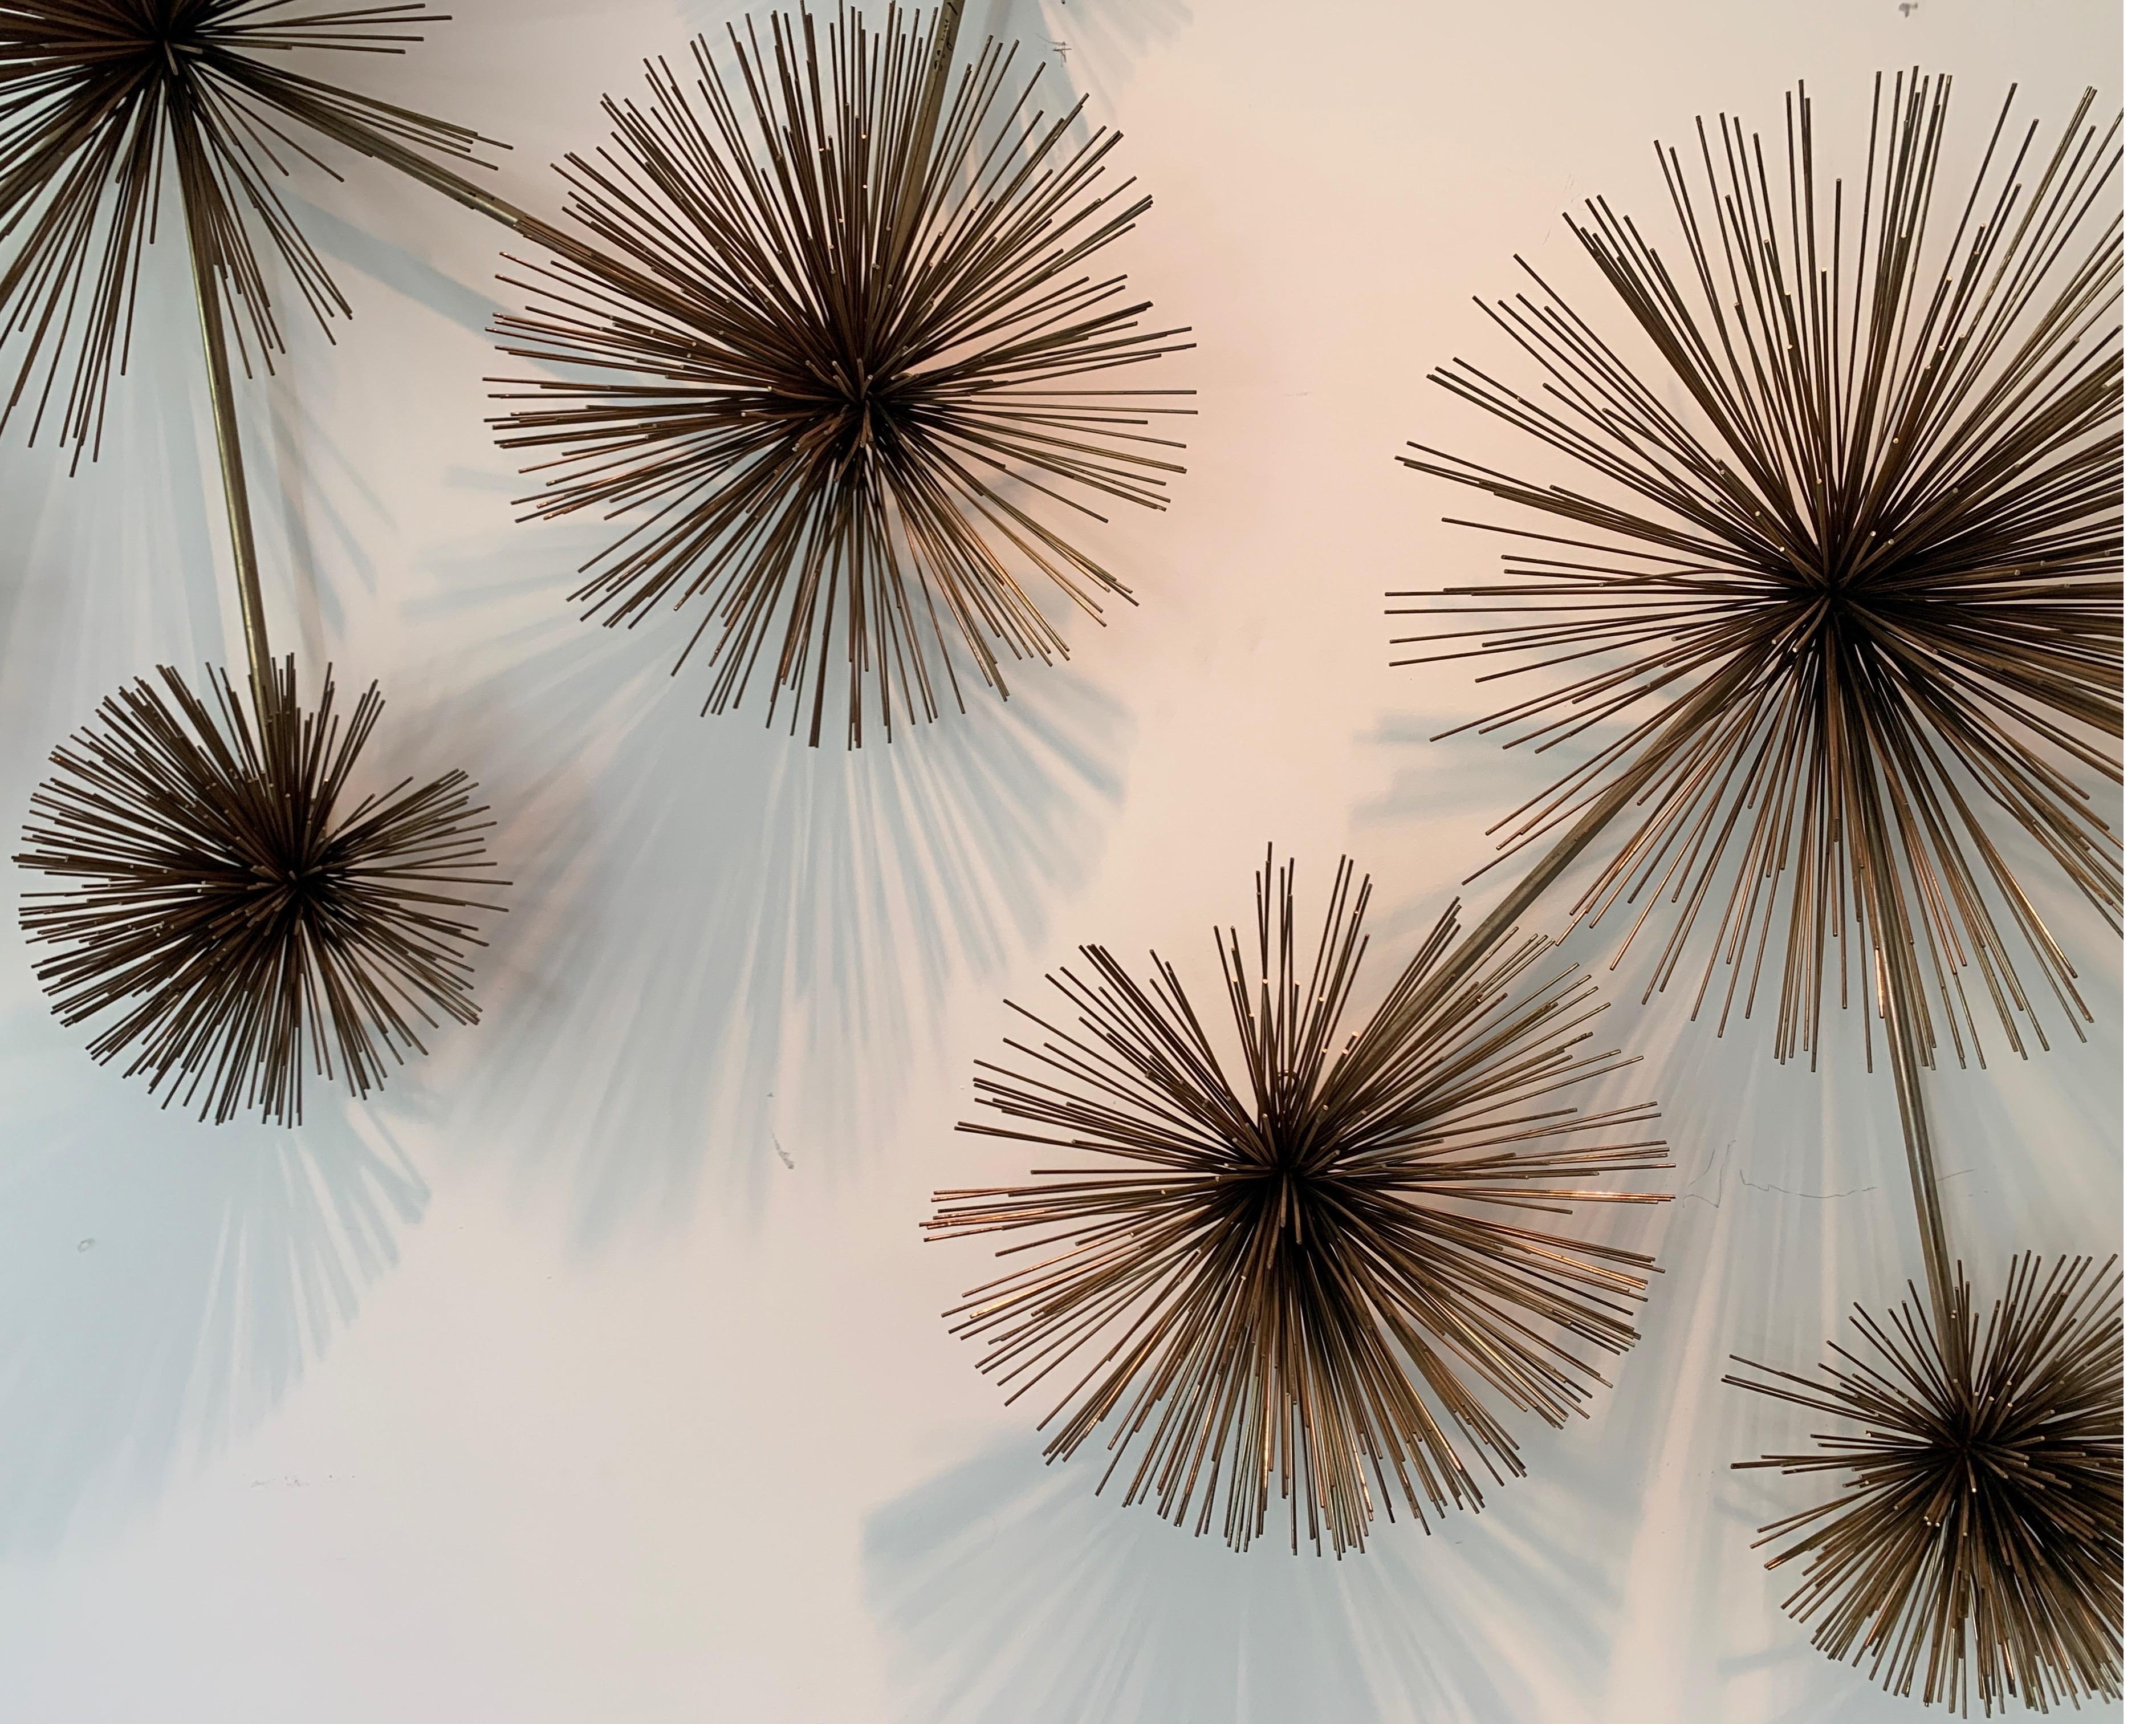 American Pair of Curtis Jere Sea Urchin Wall Sculptures